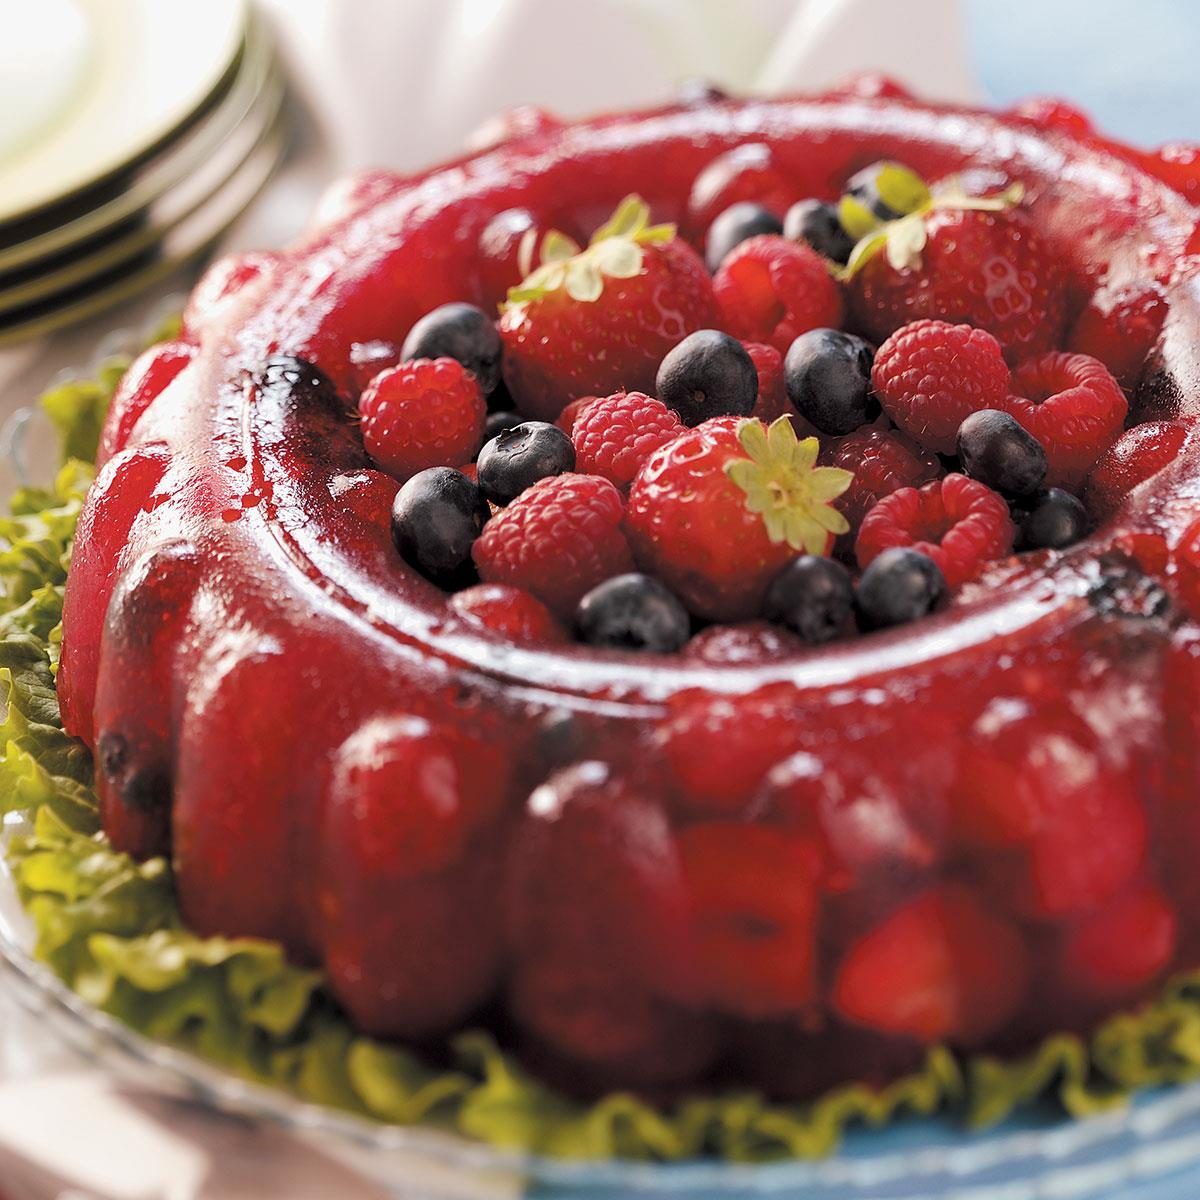 Berry Gelatin Mold Recipe: How to Make It